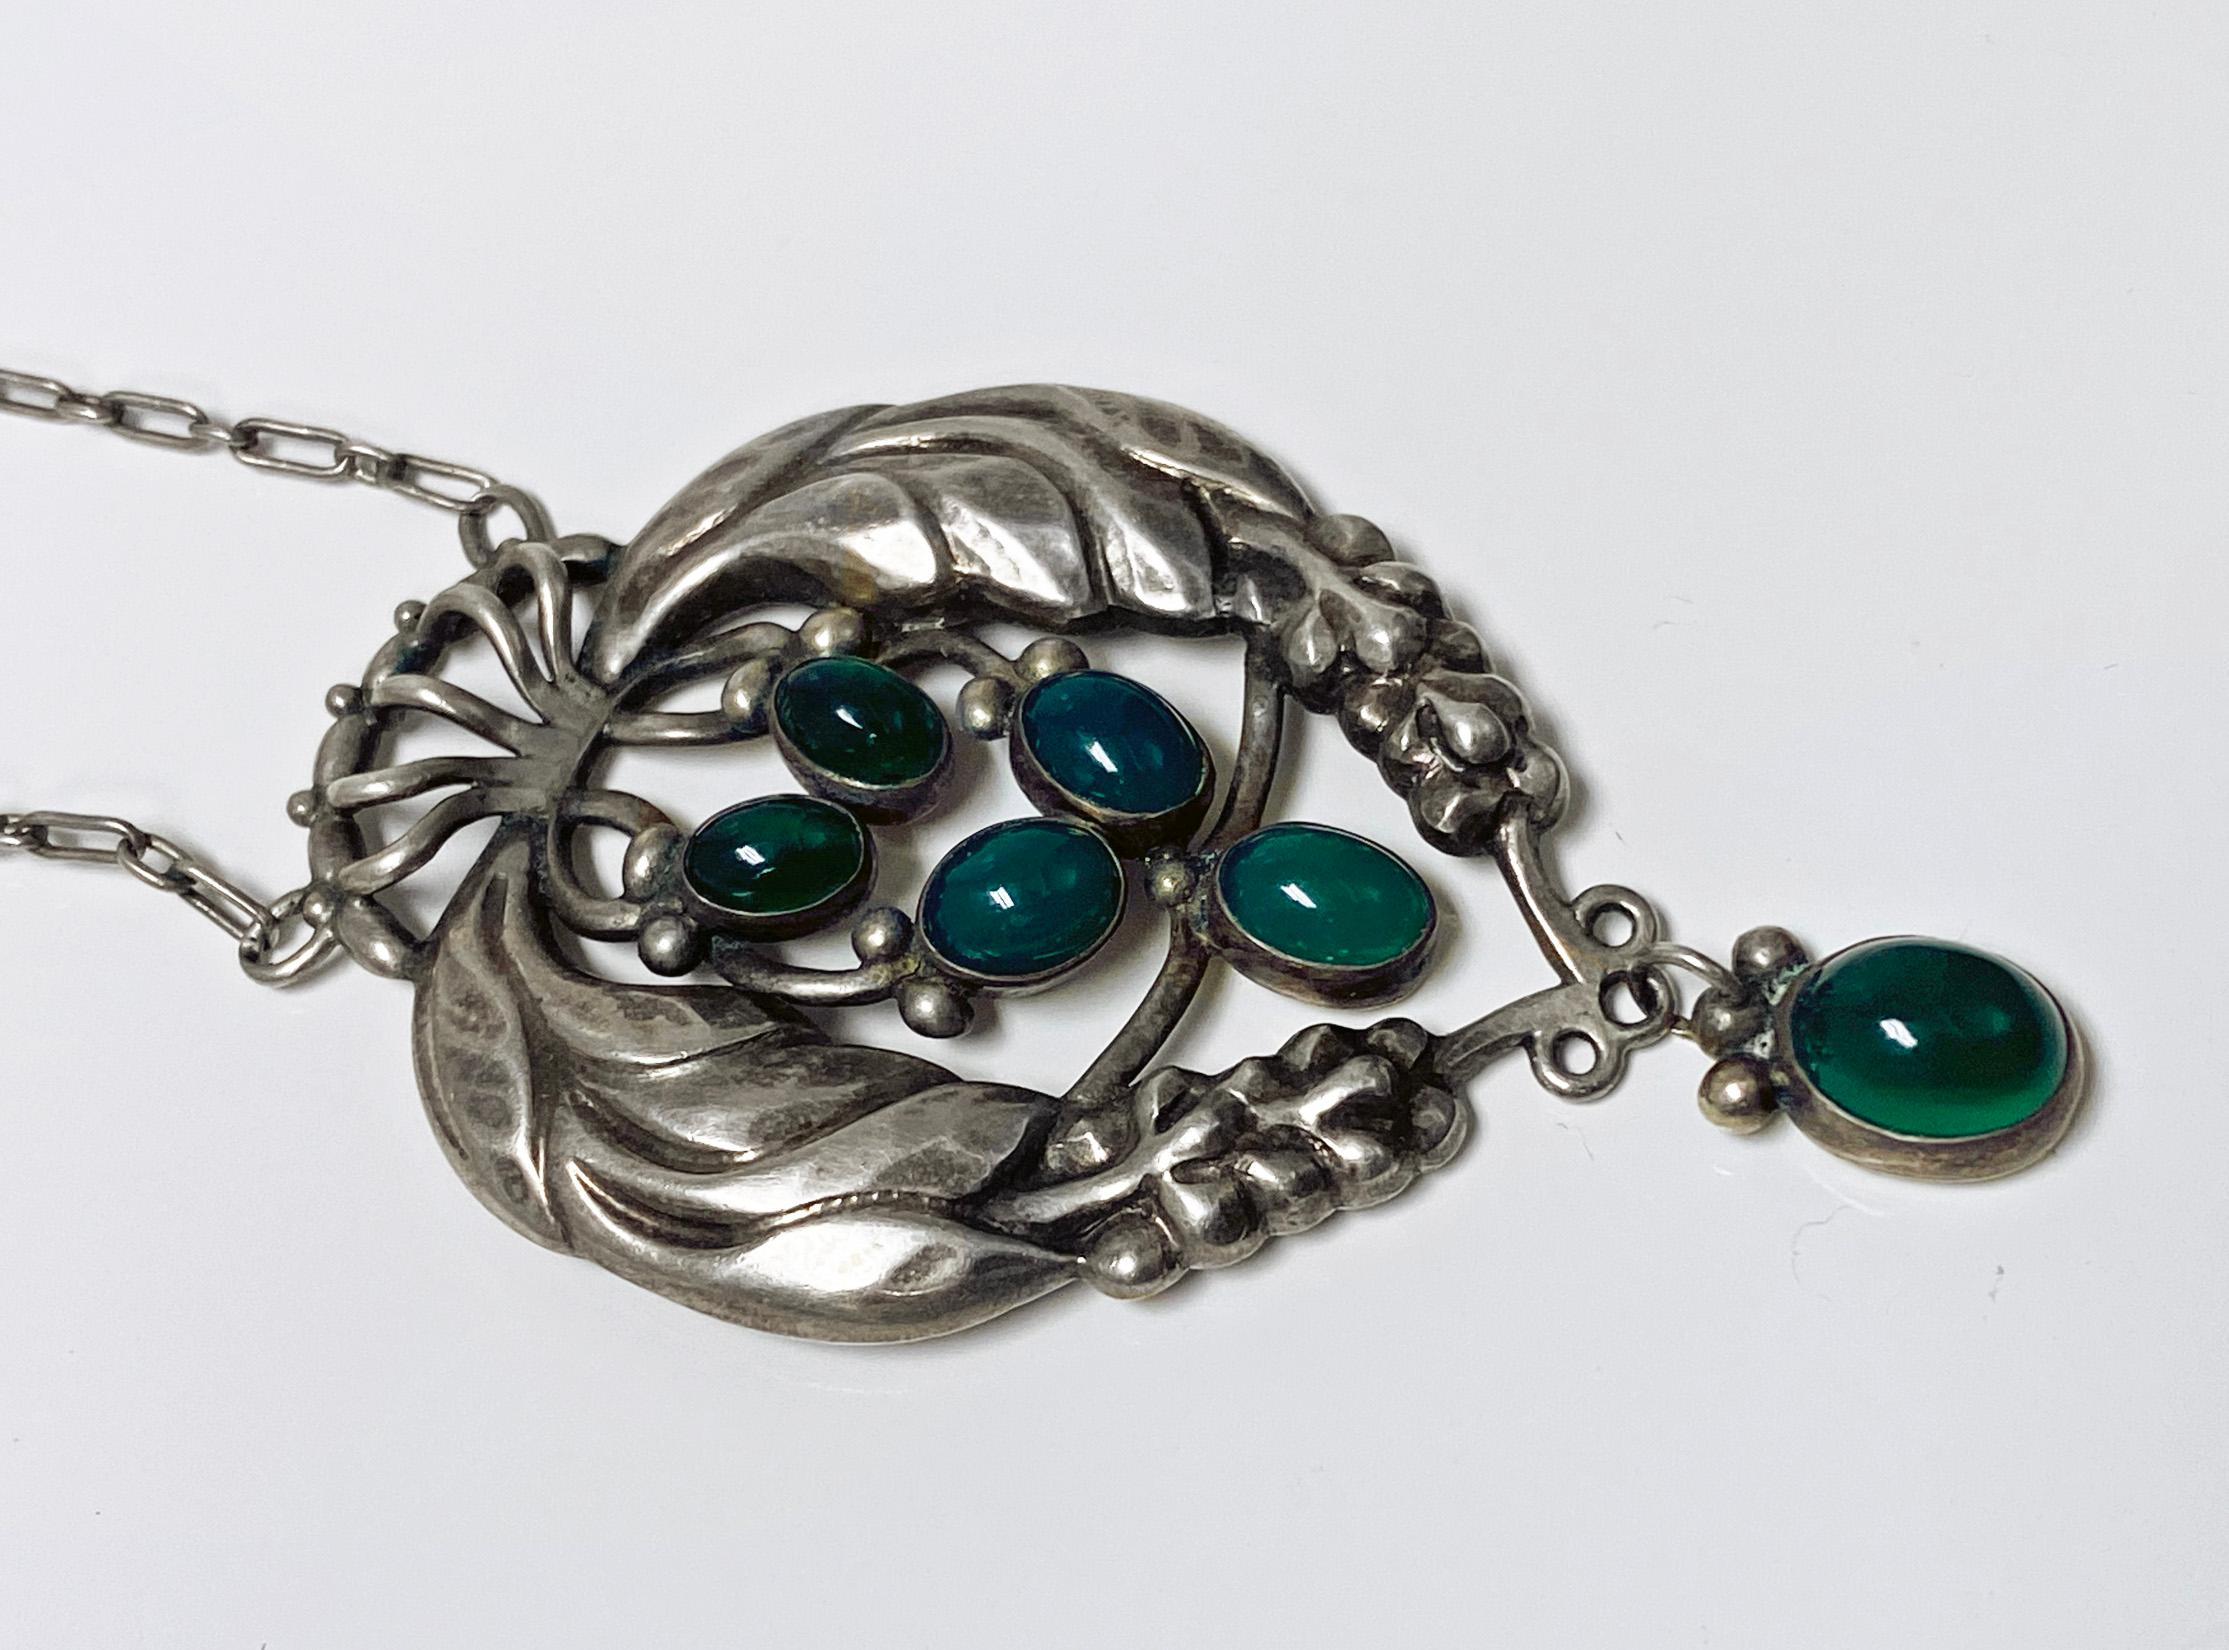 Early Georg Jensen design No 5 Pendant Necklace, Denmark C.1908. Exceptional rare chrysoprase pendant, original chan. Hallmarks for 1908-1914. Pendant measures 2.75 inches drop x 1.75 inches width. Length of chain 24 inches. Item Weight: 20.20